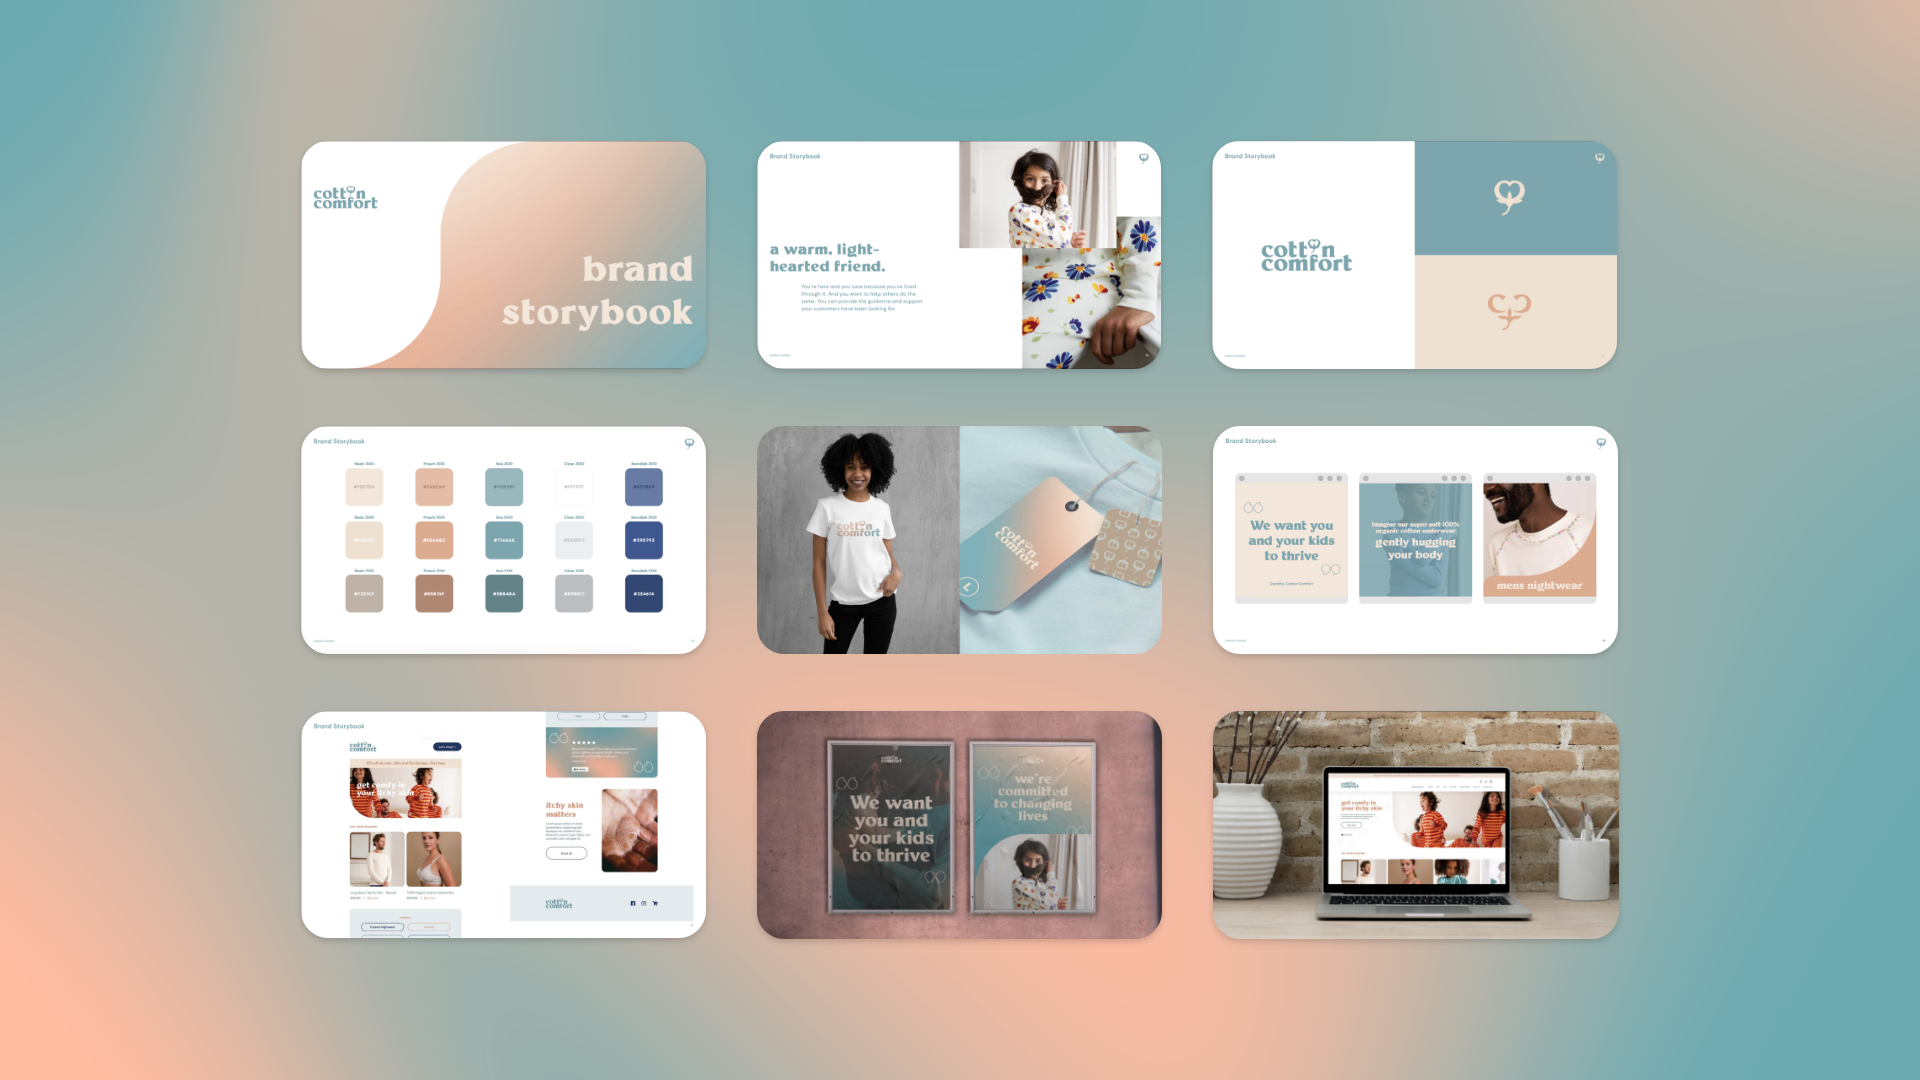 Cotton Comfort brand guidelines